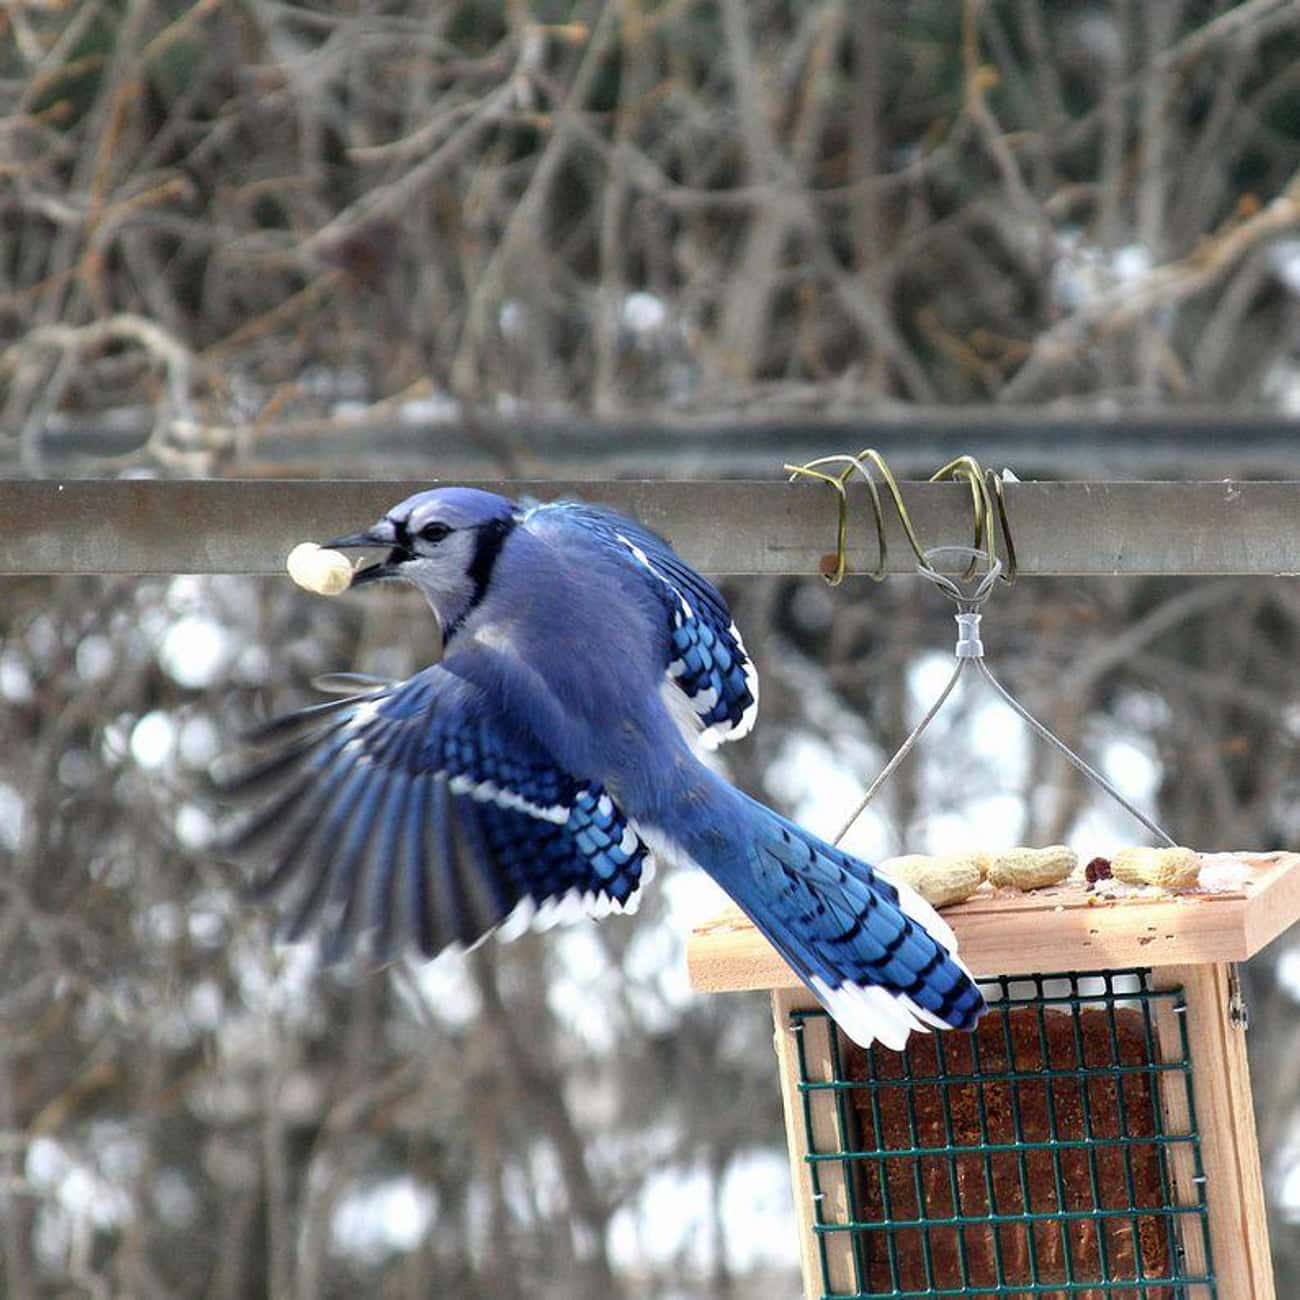 Like Crows, They’ve Been Observed Using Makeshift Tools To Obtain Food